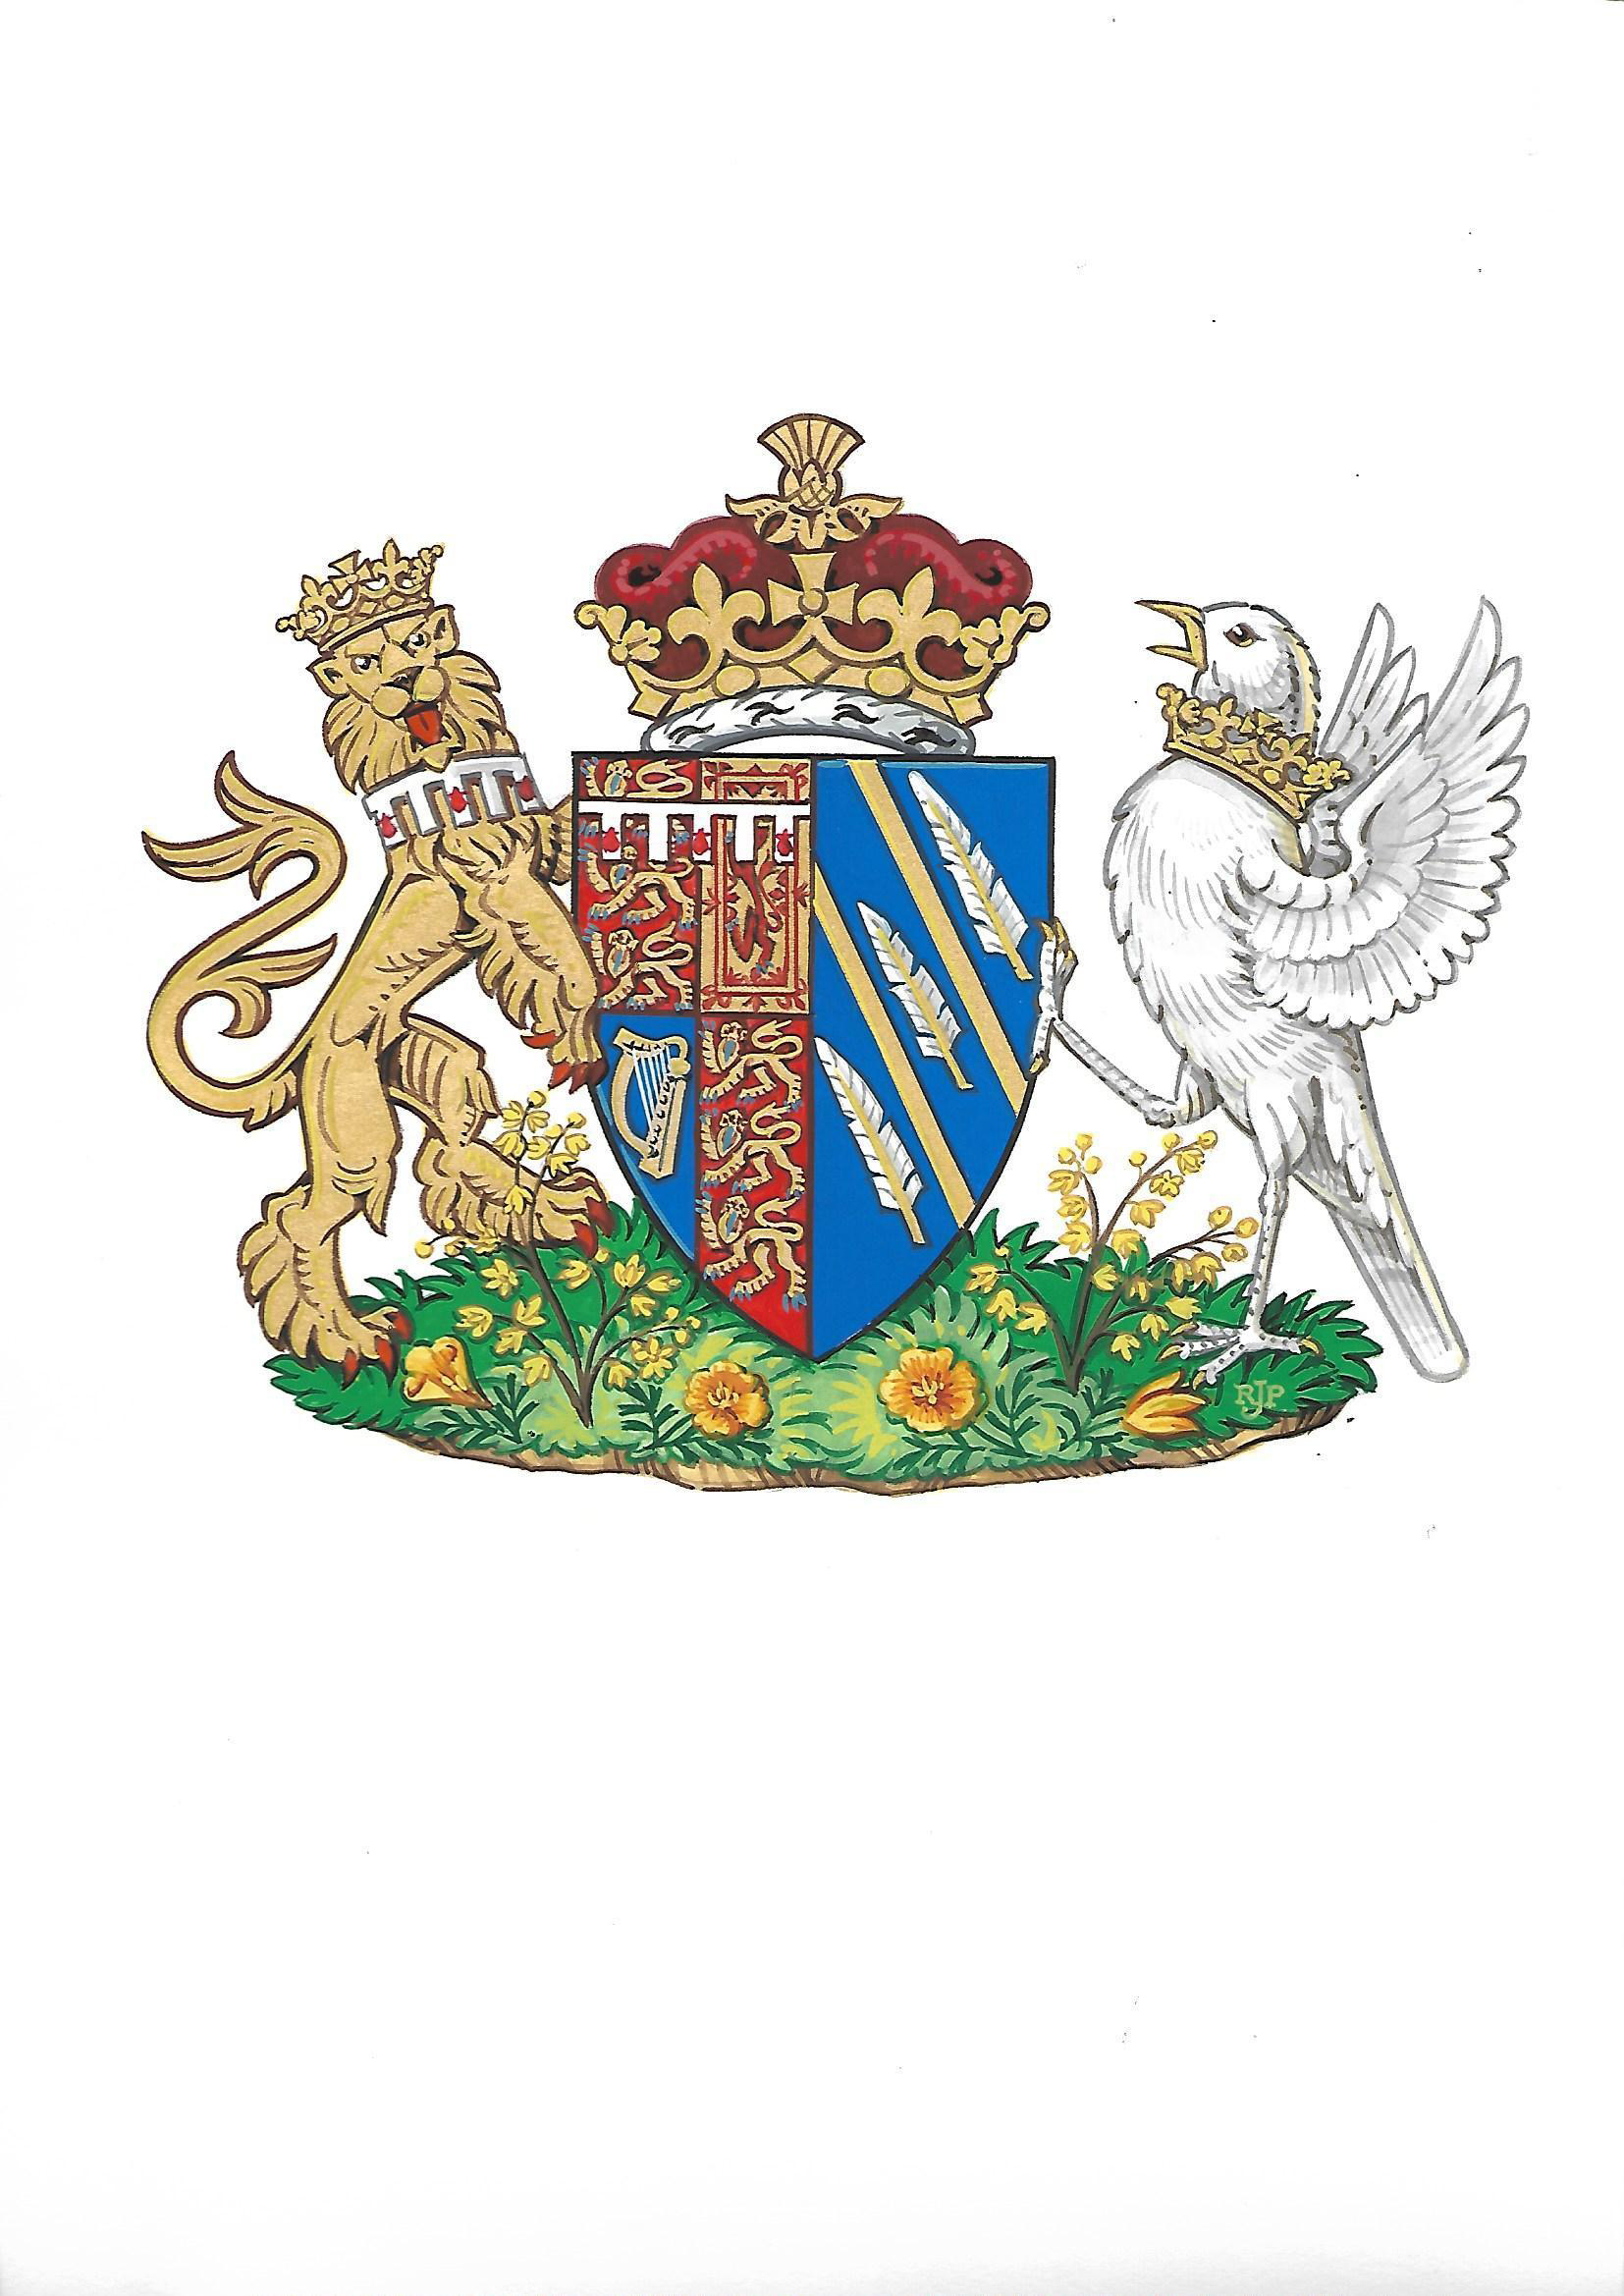 PHOTO: The newly created coat of arms of Meghan Duchess of Sussex. Mehgan Markle and Prince Harry married on May 19, and are now known as The Duke and Duchess of Sussex.